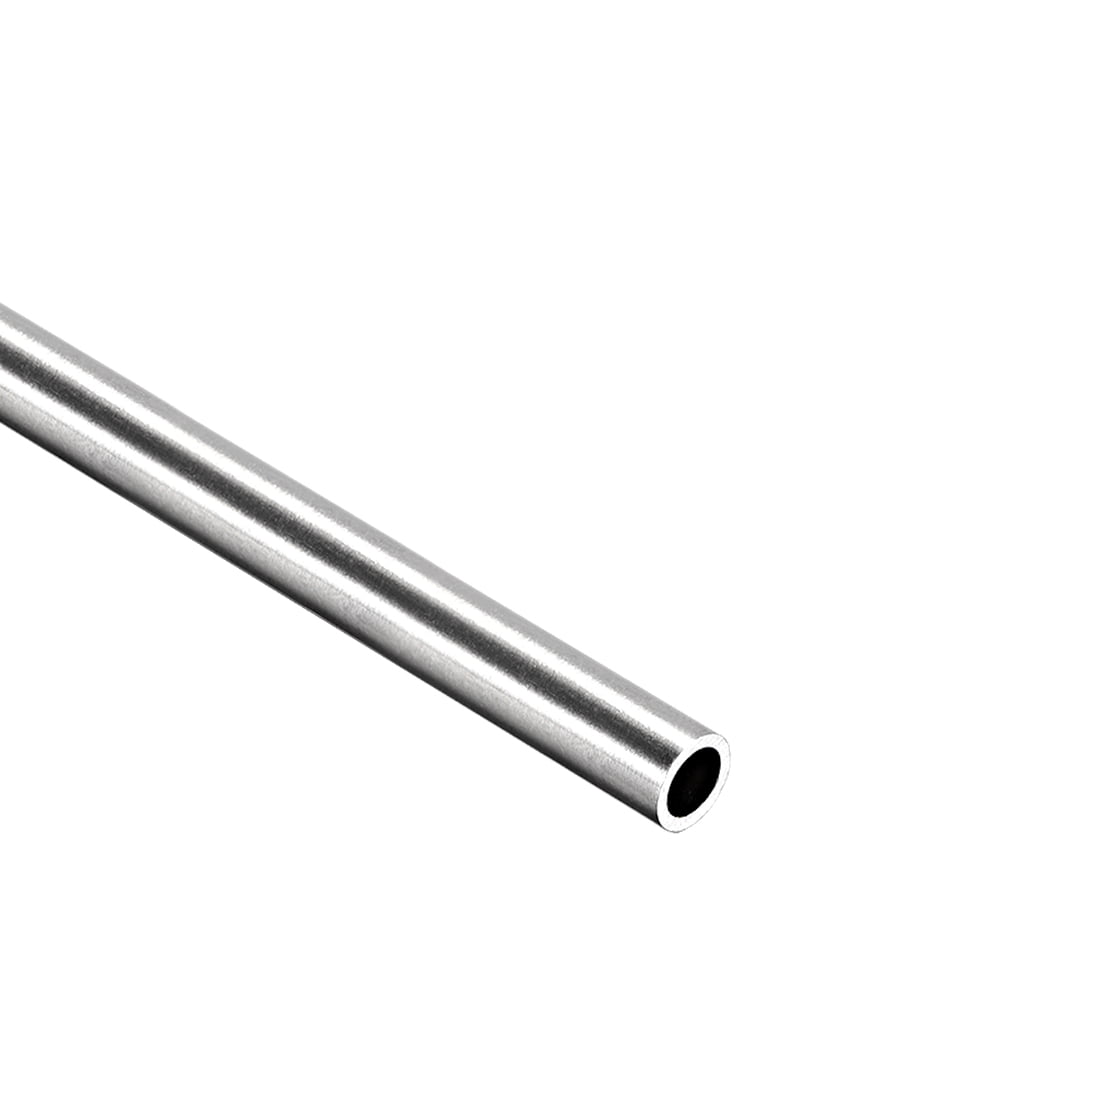 Round Stainless Steel Tube 304 6 mm OD 0.2 mm Wall Thickness 250 mm Length Seamless Straight Pipe 